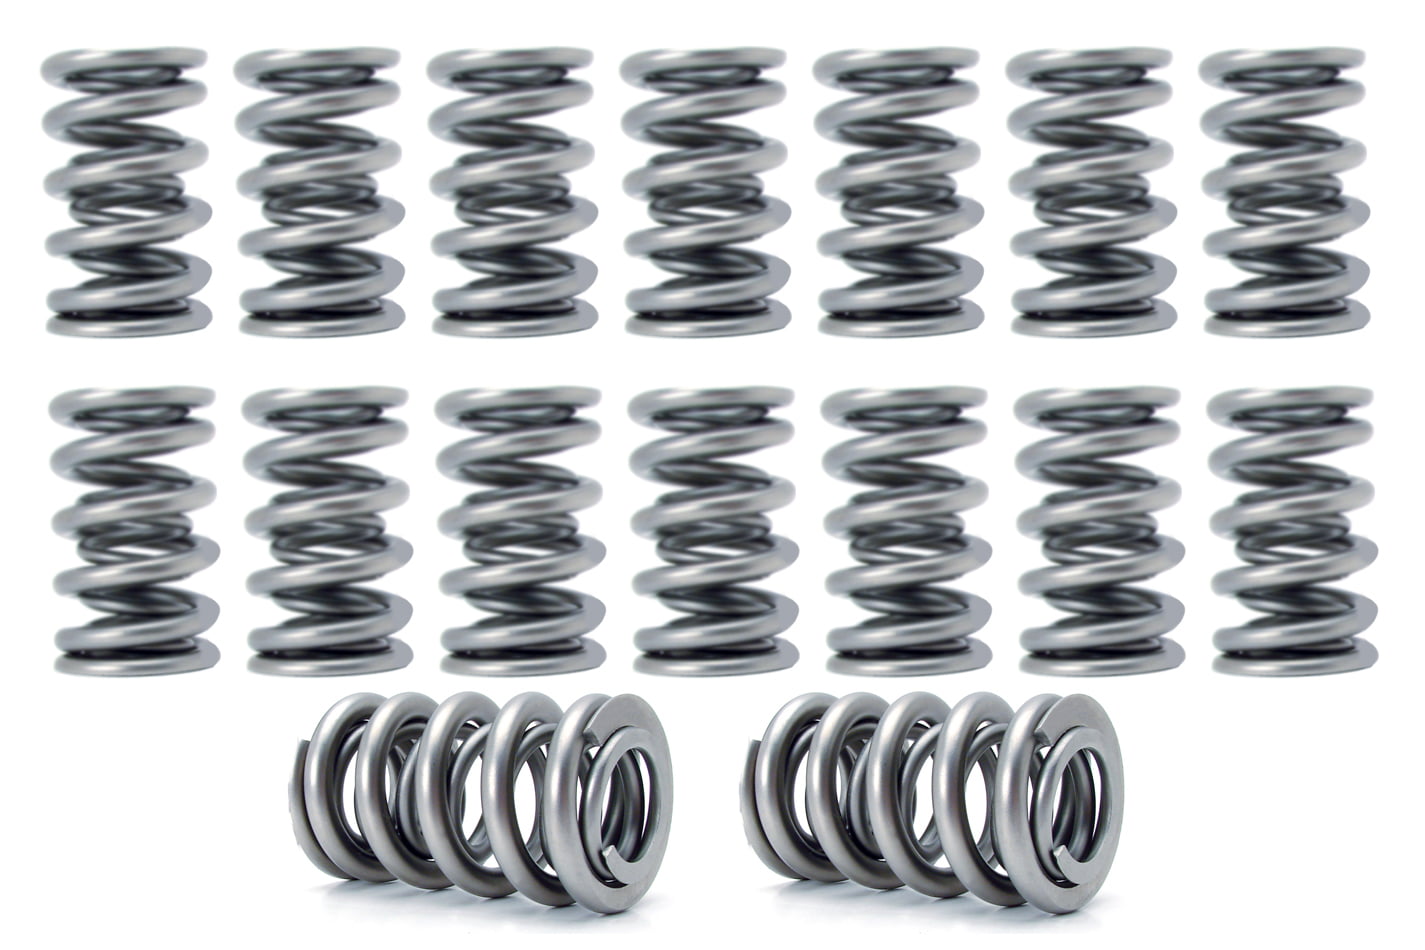 COMP Cams 26527-16 .700 Max Lift Dual Valve Springs for GM LS7 LT1 & LT4 Engines